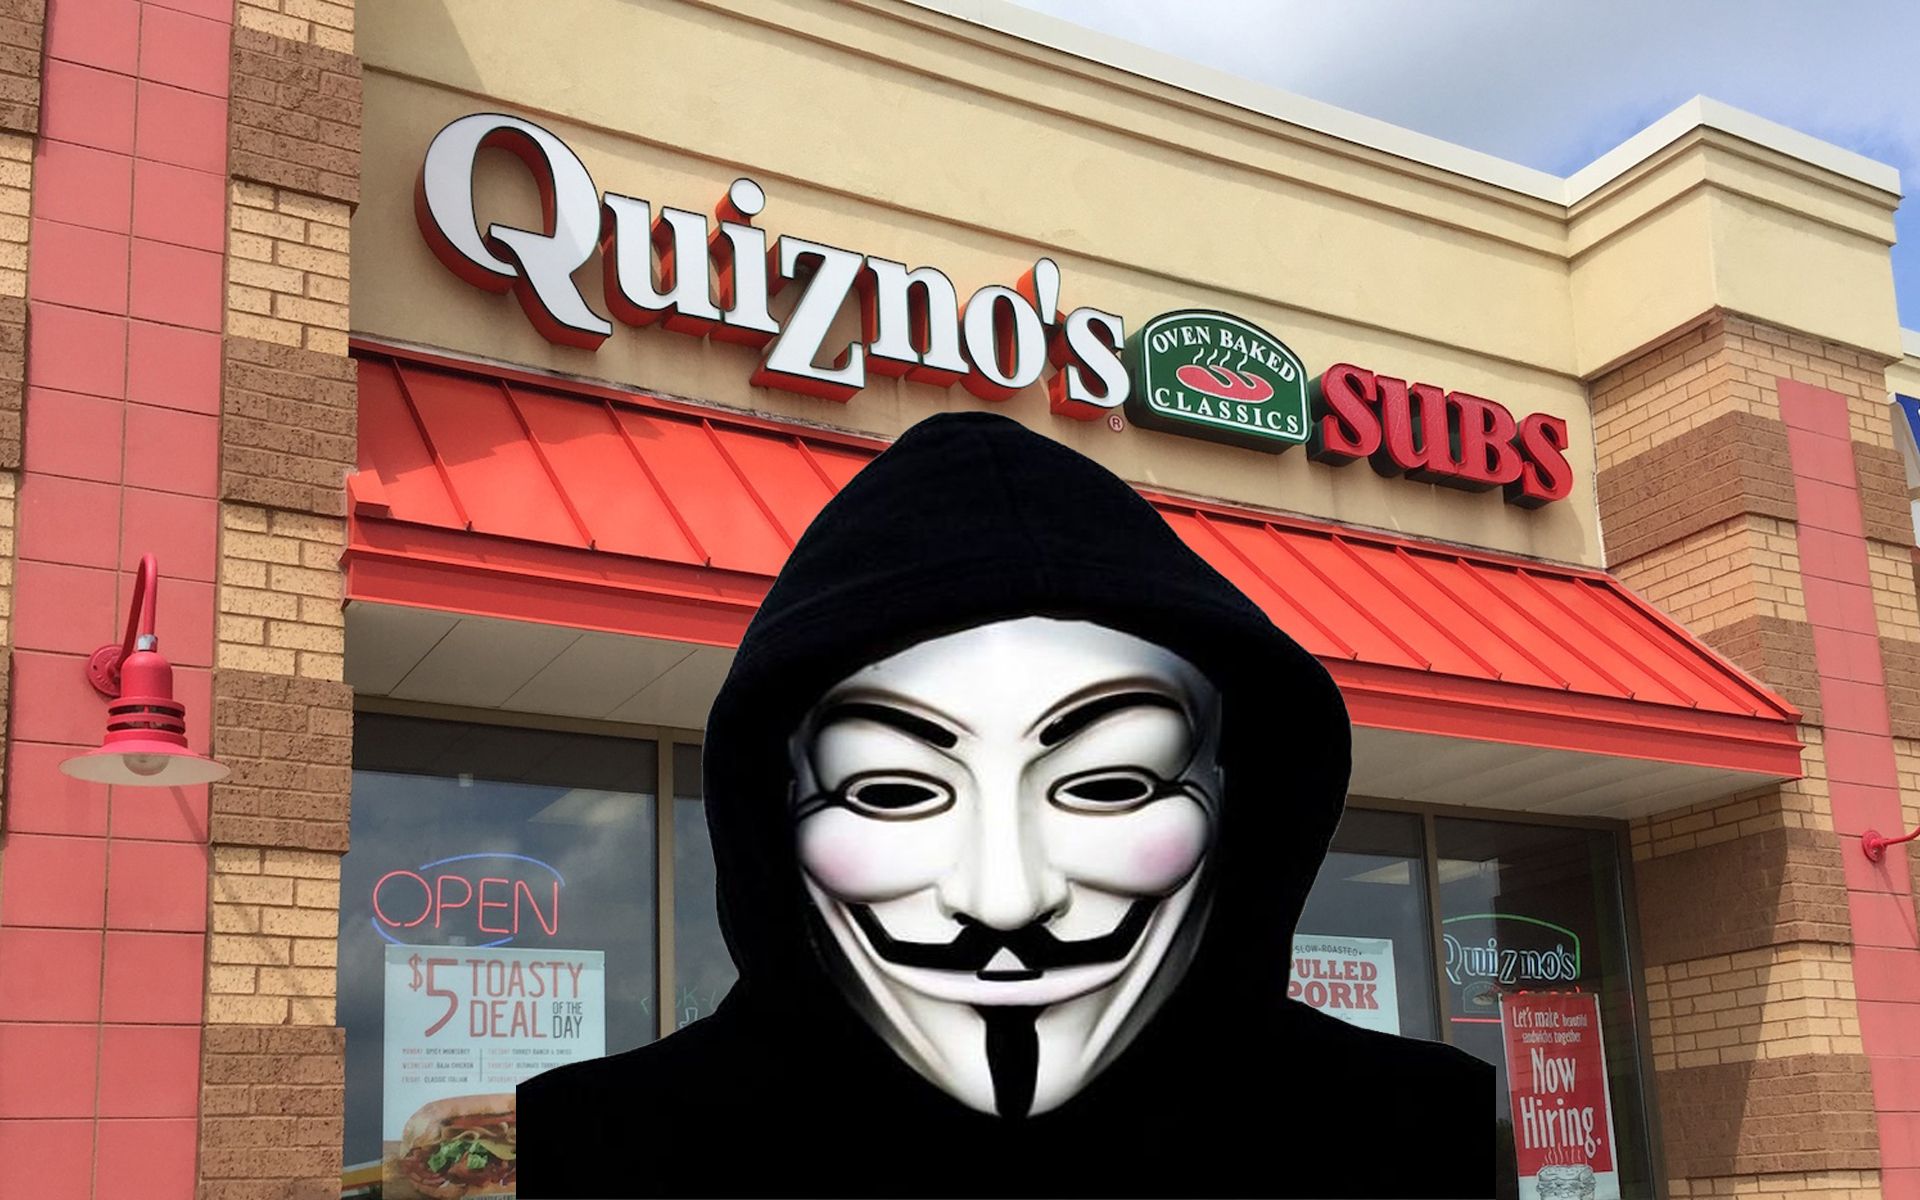 BREAKING: The Q In Q-Anon Stands For Quizno's